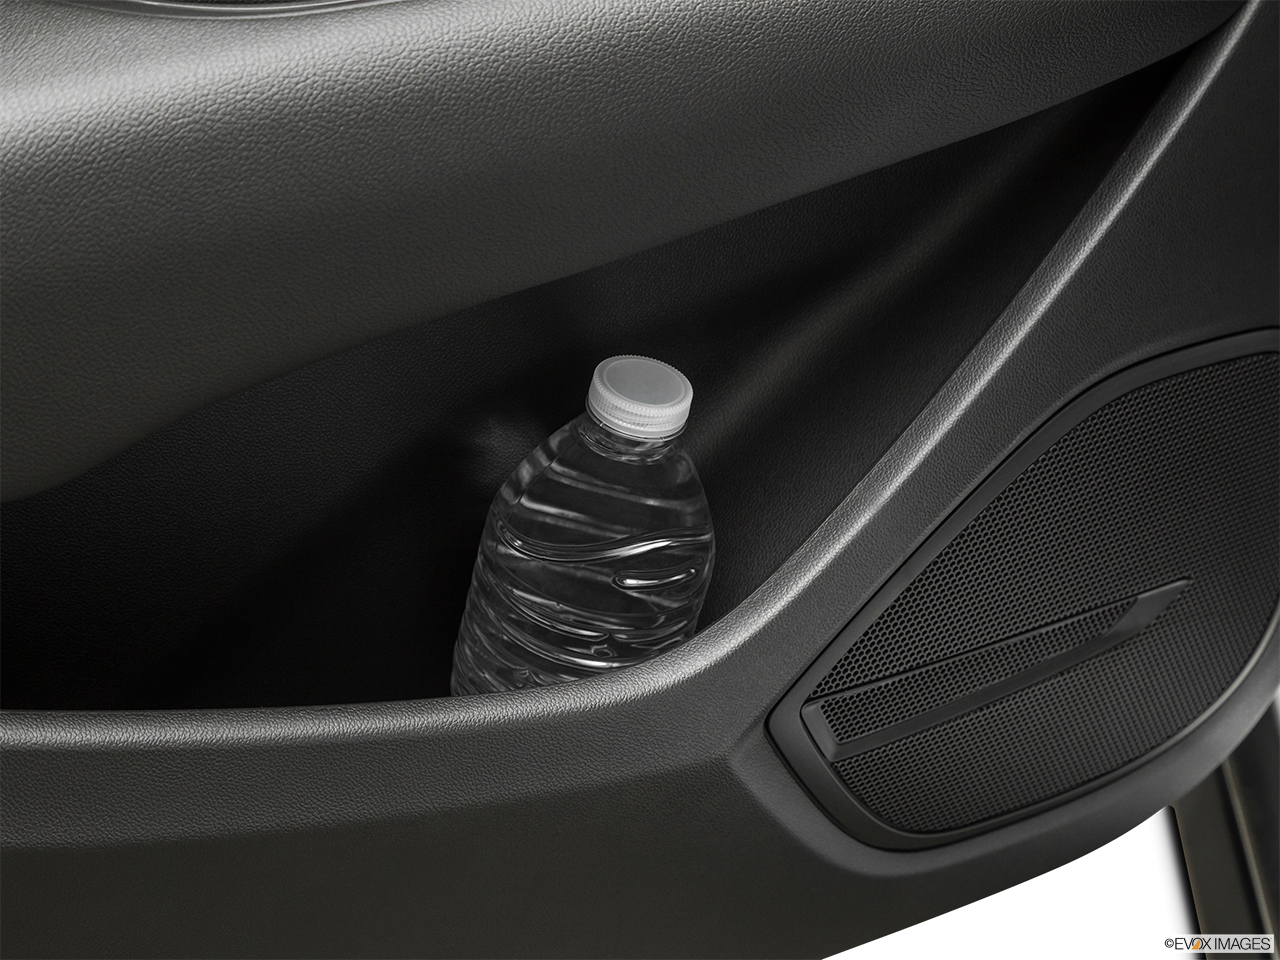 2018 Buick Regal Tourx  Preferred Second row side cup holder with coffee prop, or second row door cup holder with water bottle. 